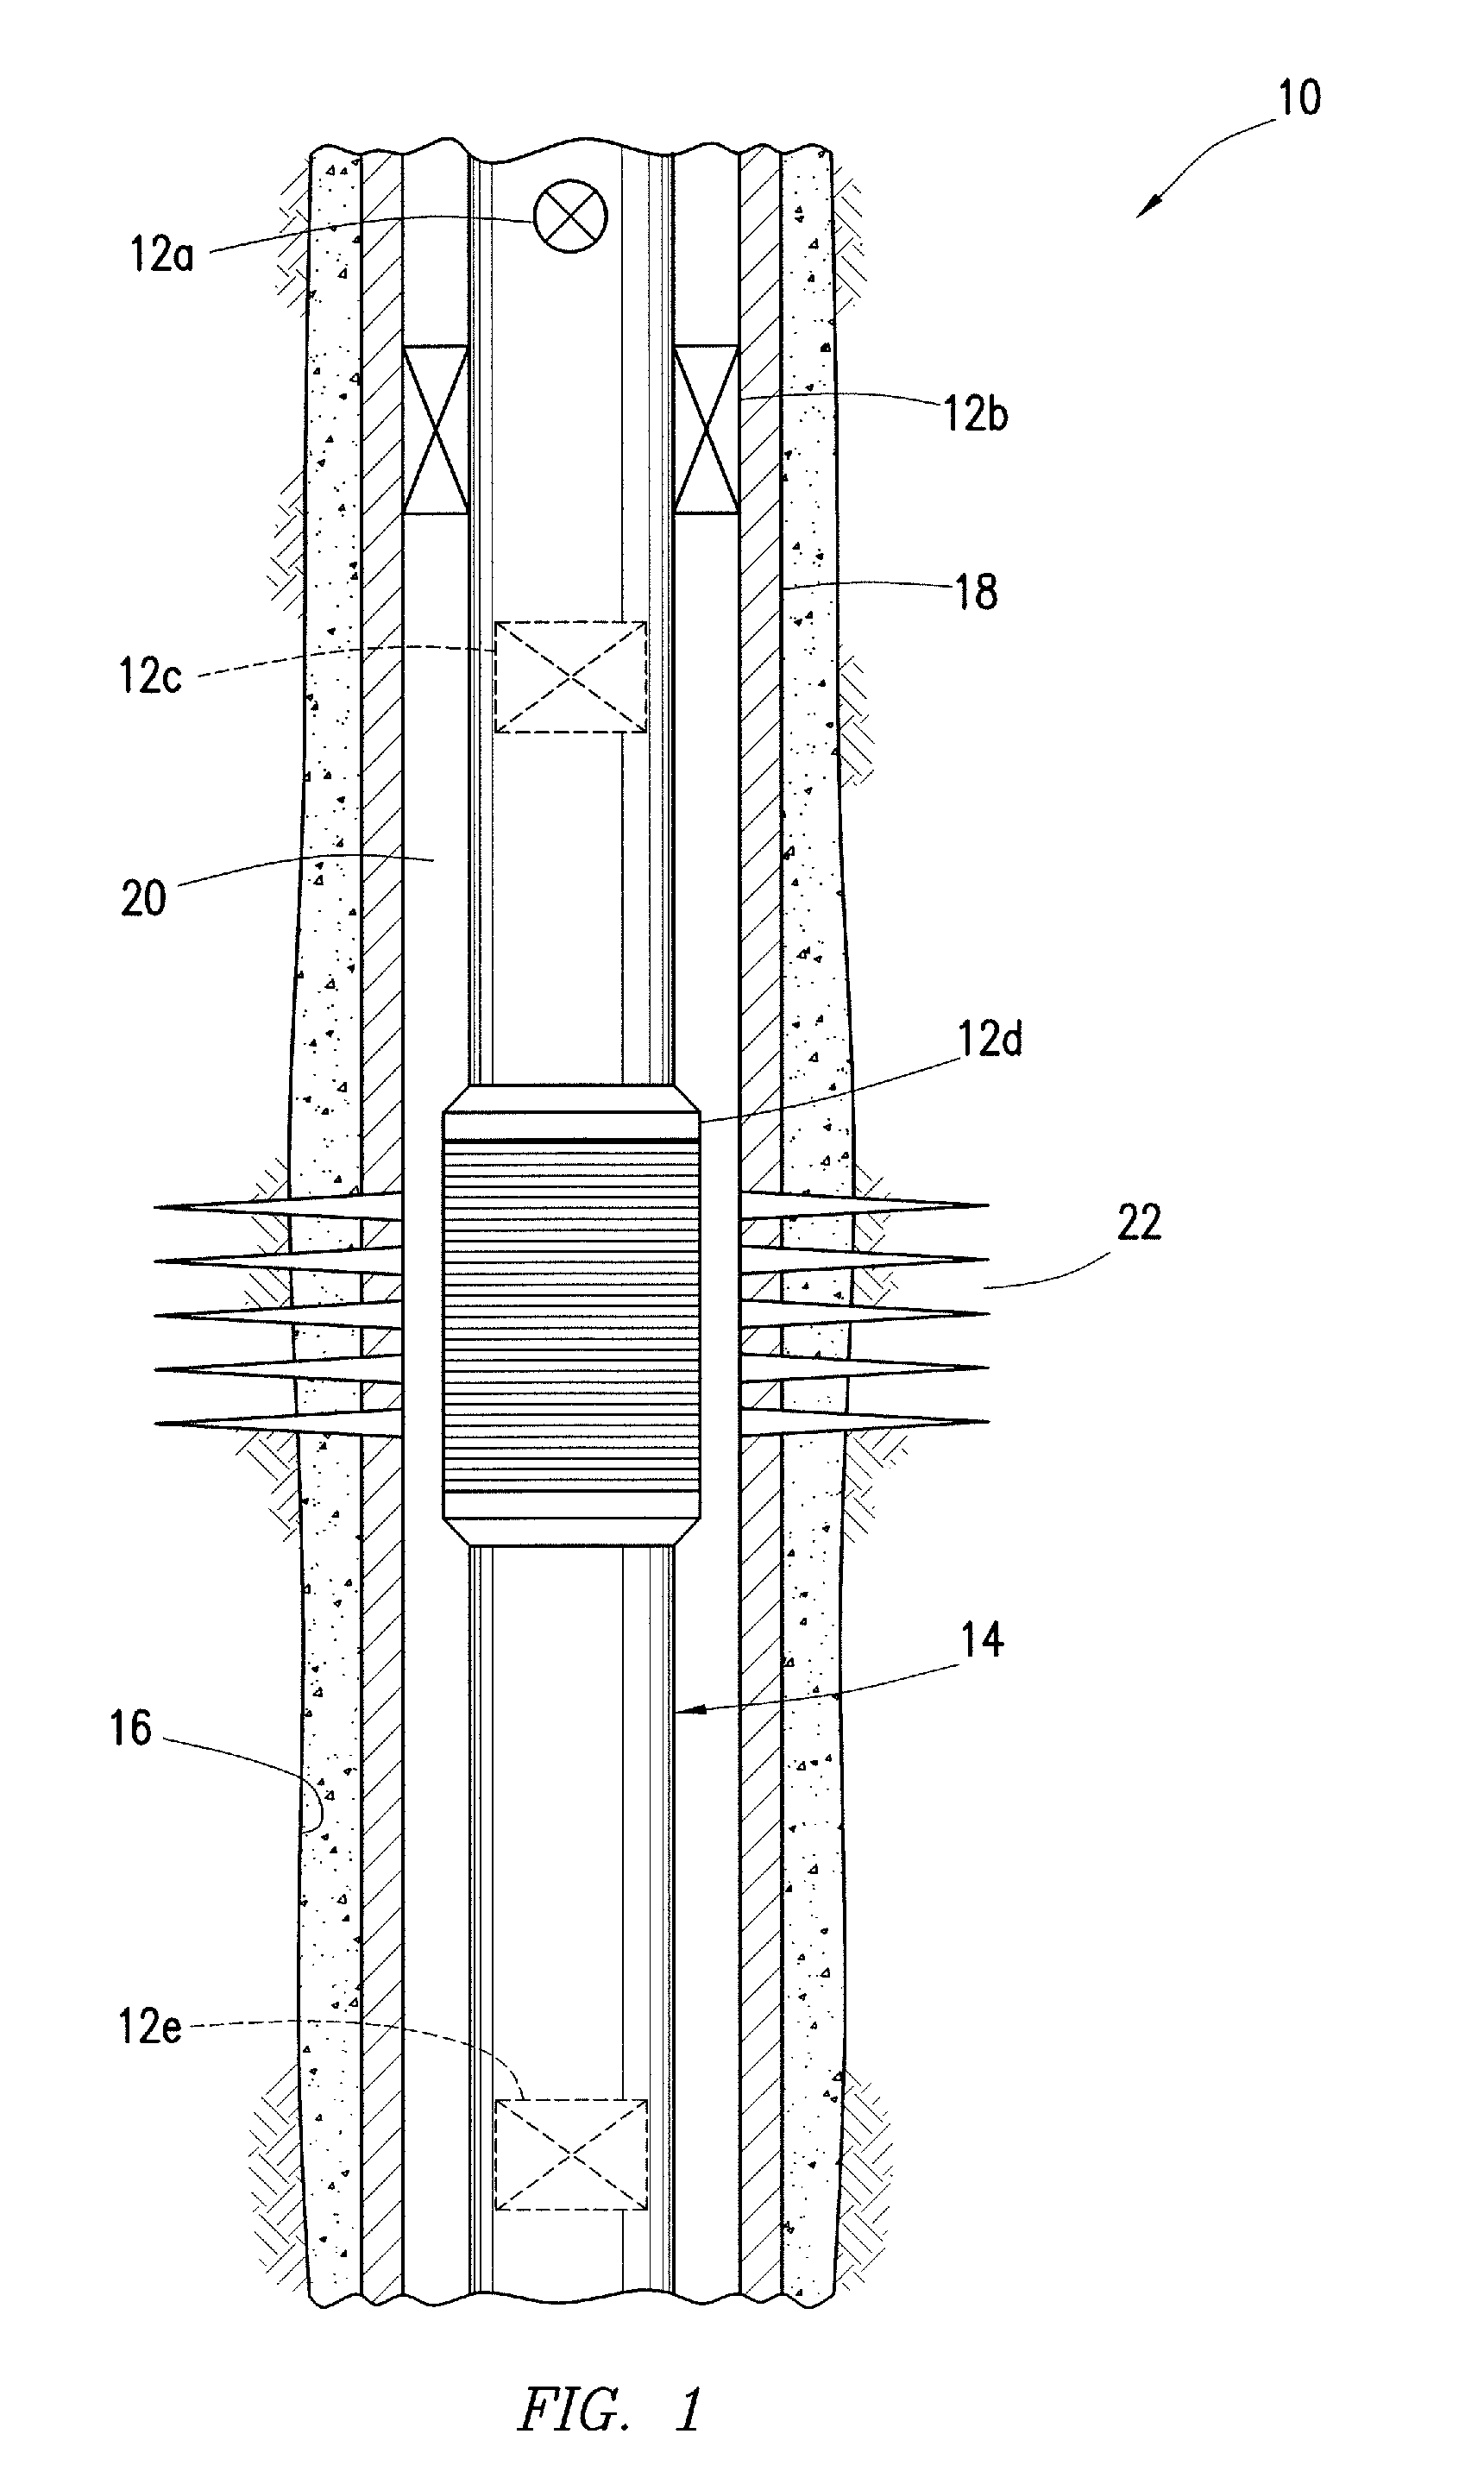 High strength dissolvable compositions for use in subterranean wells